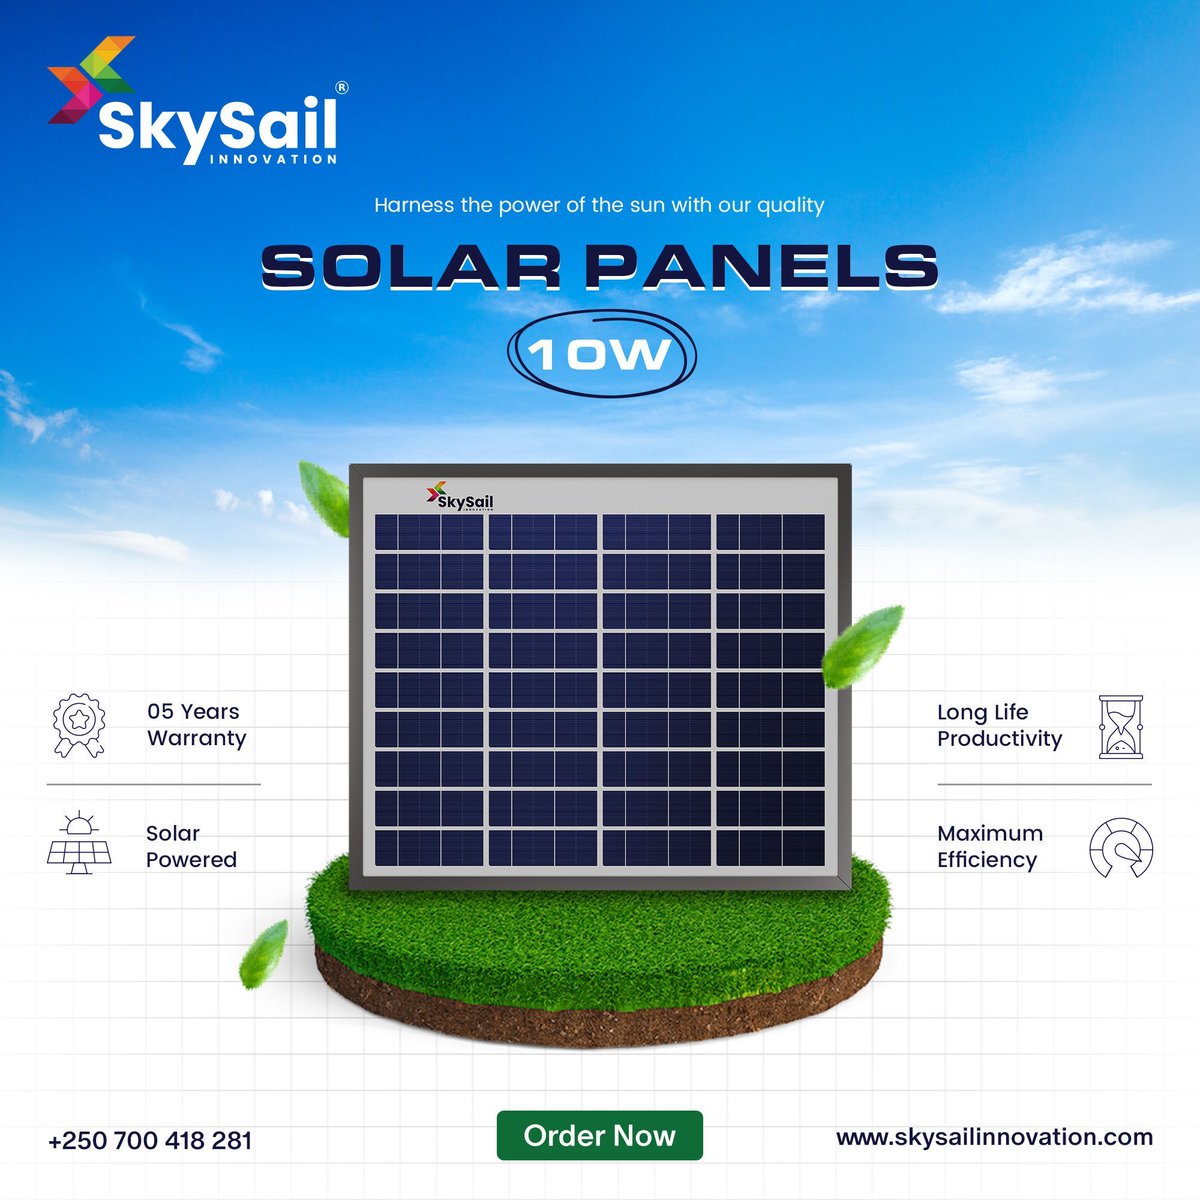 ☀️ Shine bright with SkySail Innovation's quality Solar Panels 10W! 🌞 Embrace renewable energy and illuminate your world with eco-friendly solutions. Let the sun power your journey towards sustainability! 💡 #SkySailInnovation #SolarPower #RenewableEnergy